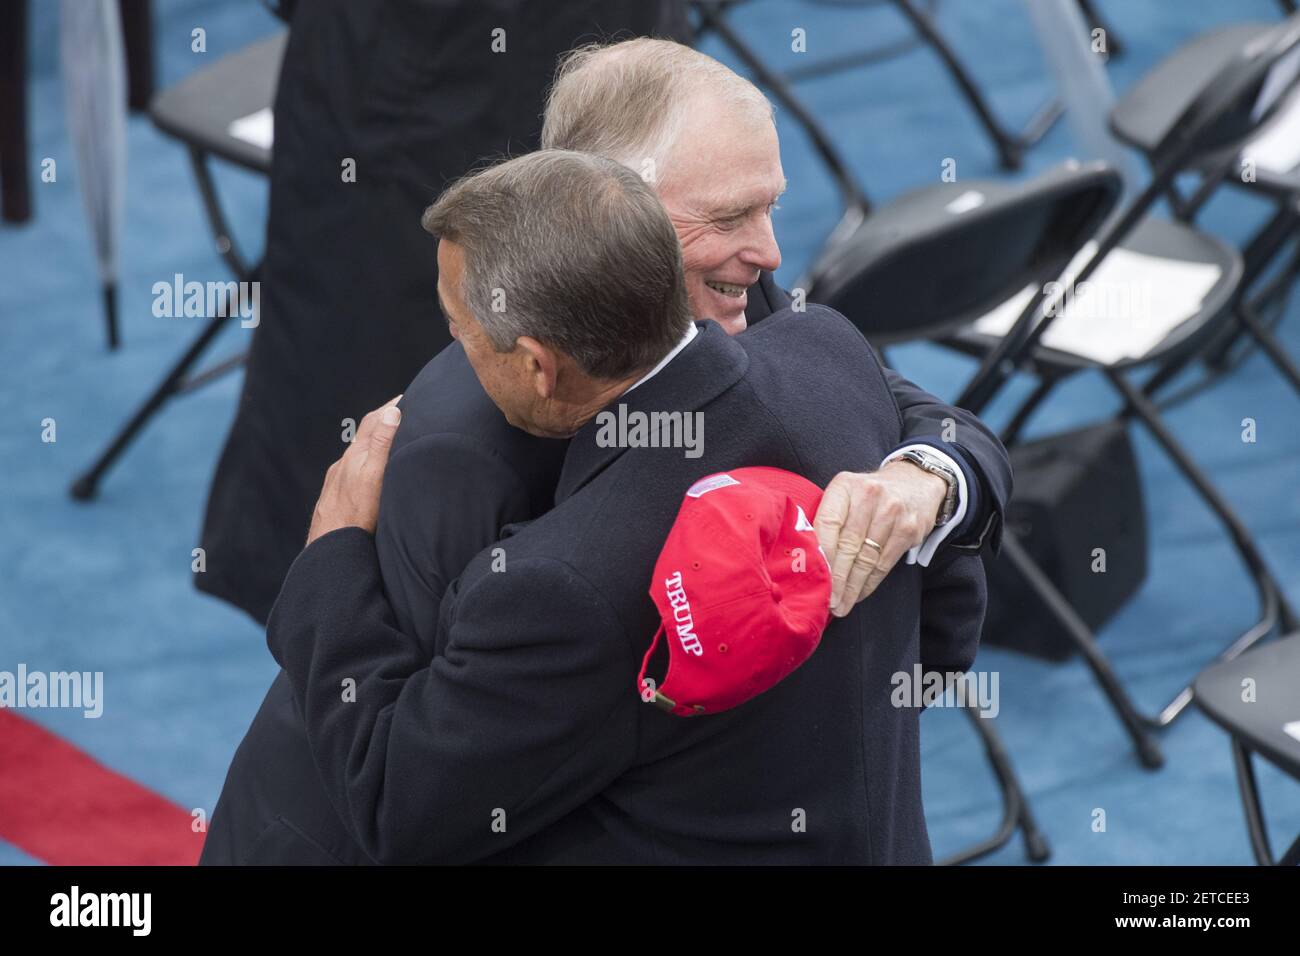 UNITED STATES - JANUARY 20: Former Speaker John Boehner, R-Ohio, greets former Vice President Dan Quayle before Donald J. Trump was sworn in as the 45th President of the United States on the West Front of the Capitol January 20, 2017. (Photo By Tom Williams/CQ Roll Call) *** Please Use Credit from Credit Field *** Stock Photo